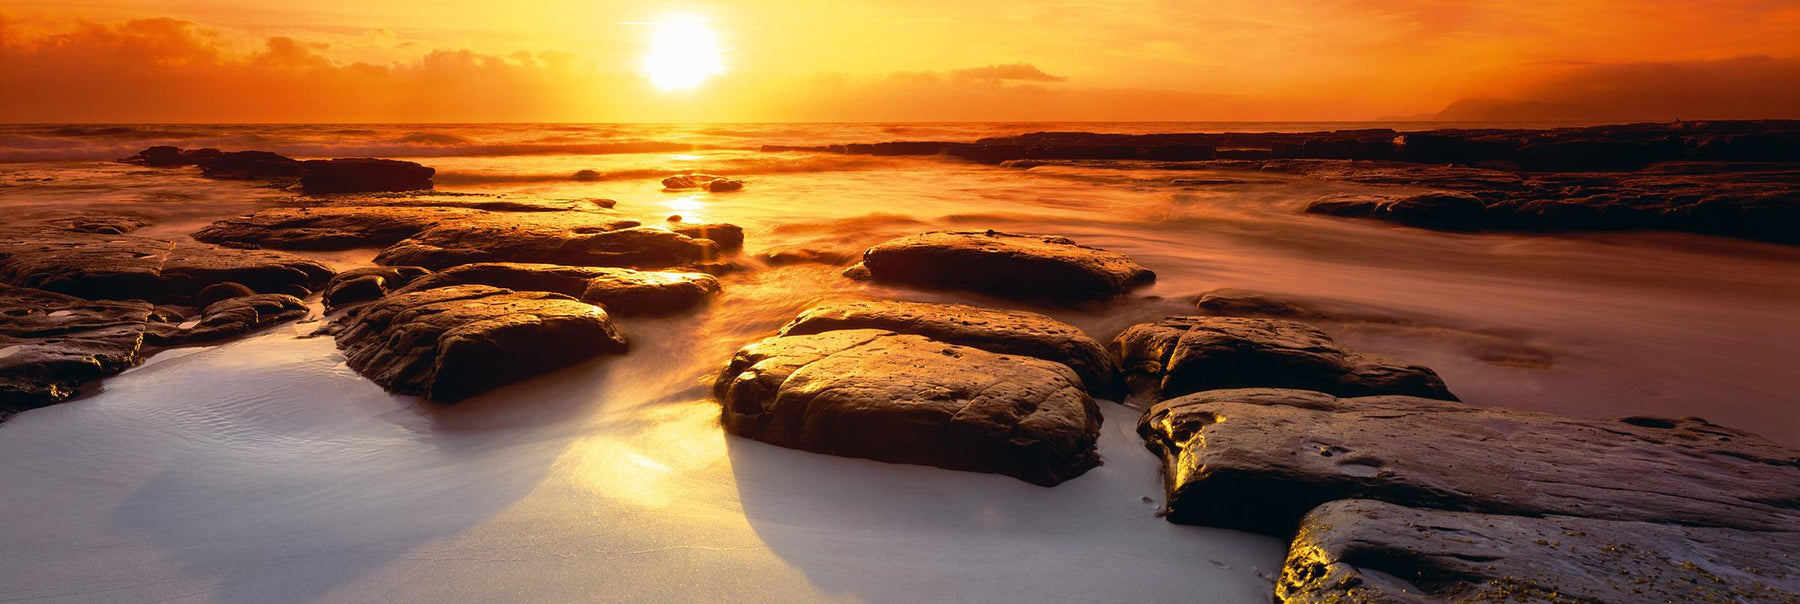 Rocks on a sandy beach during low tide at Wineglass Bay Australia with the sun rising in background